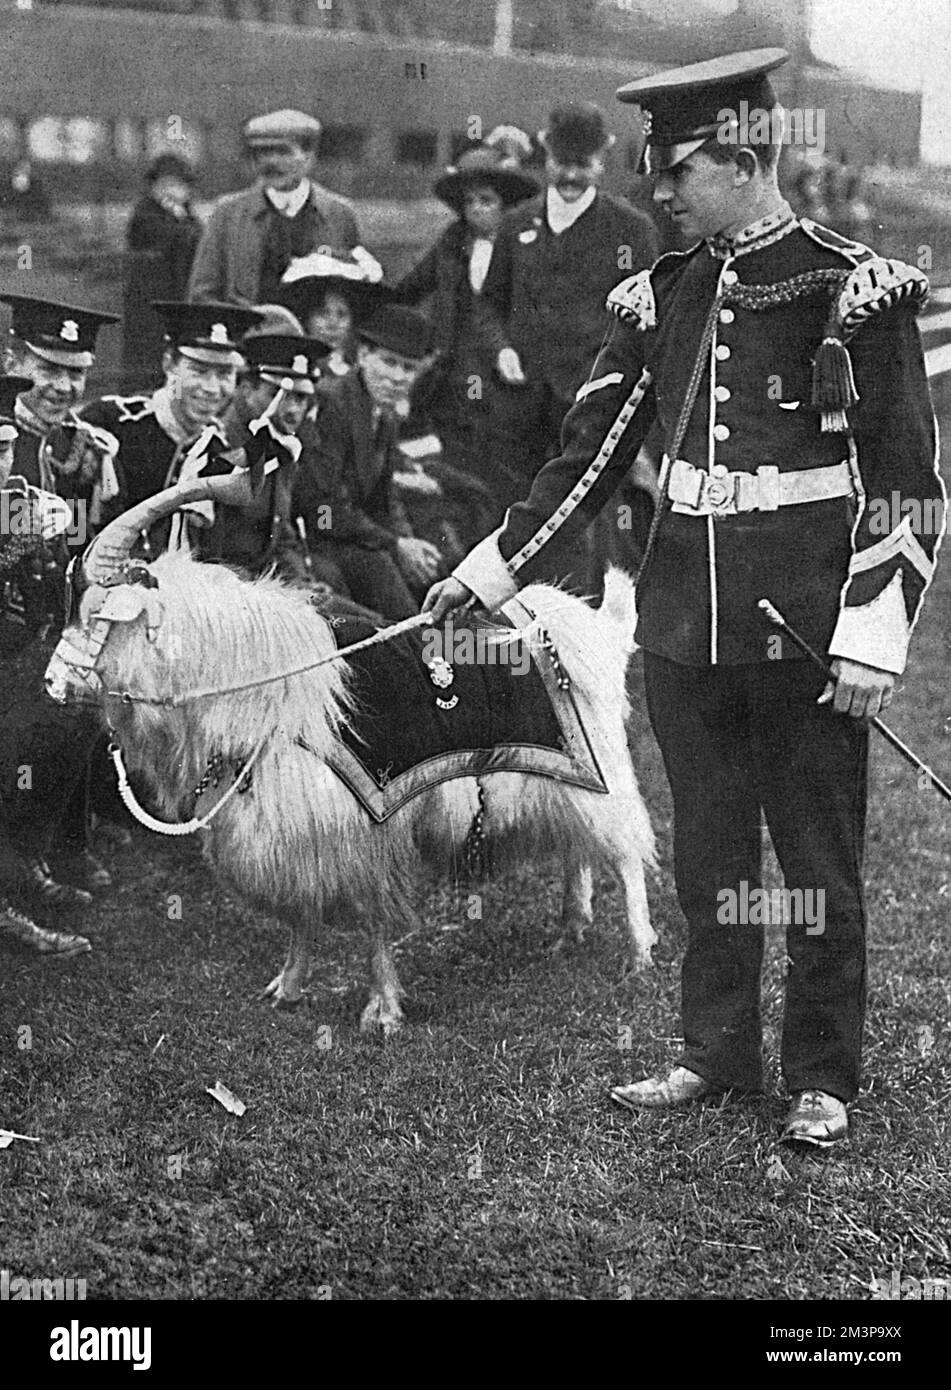 The billy goat, the pet mascot of the Welsh Regiment pictured at a football match in September 1914.  He is wearing a tunic bearing one of the emblems of the regiment, the Prince of Wales plumes.       Date: 1914 Stock Photo